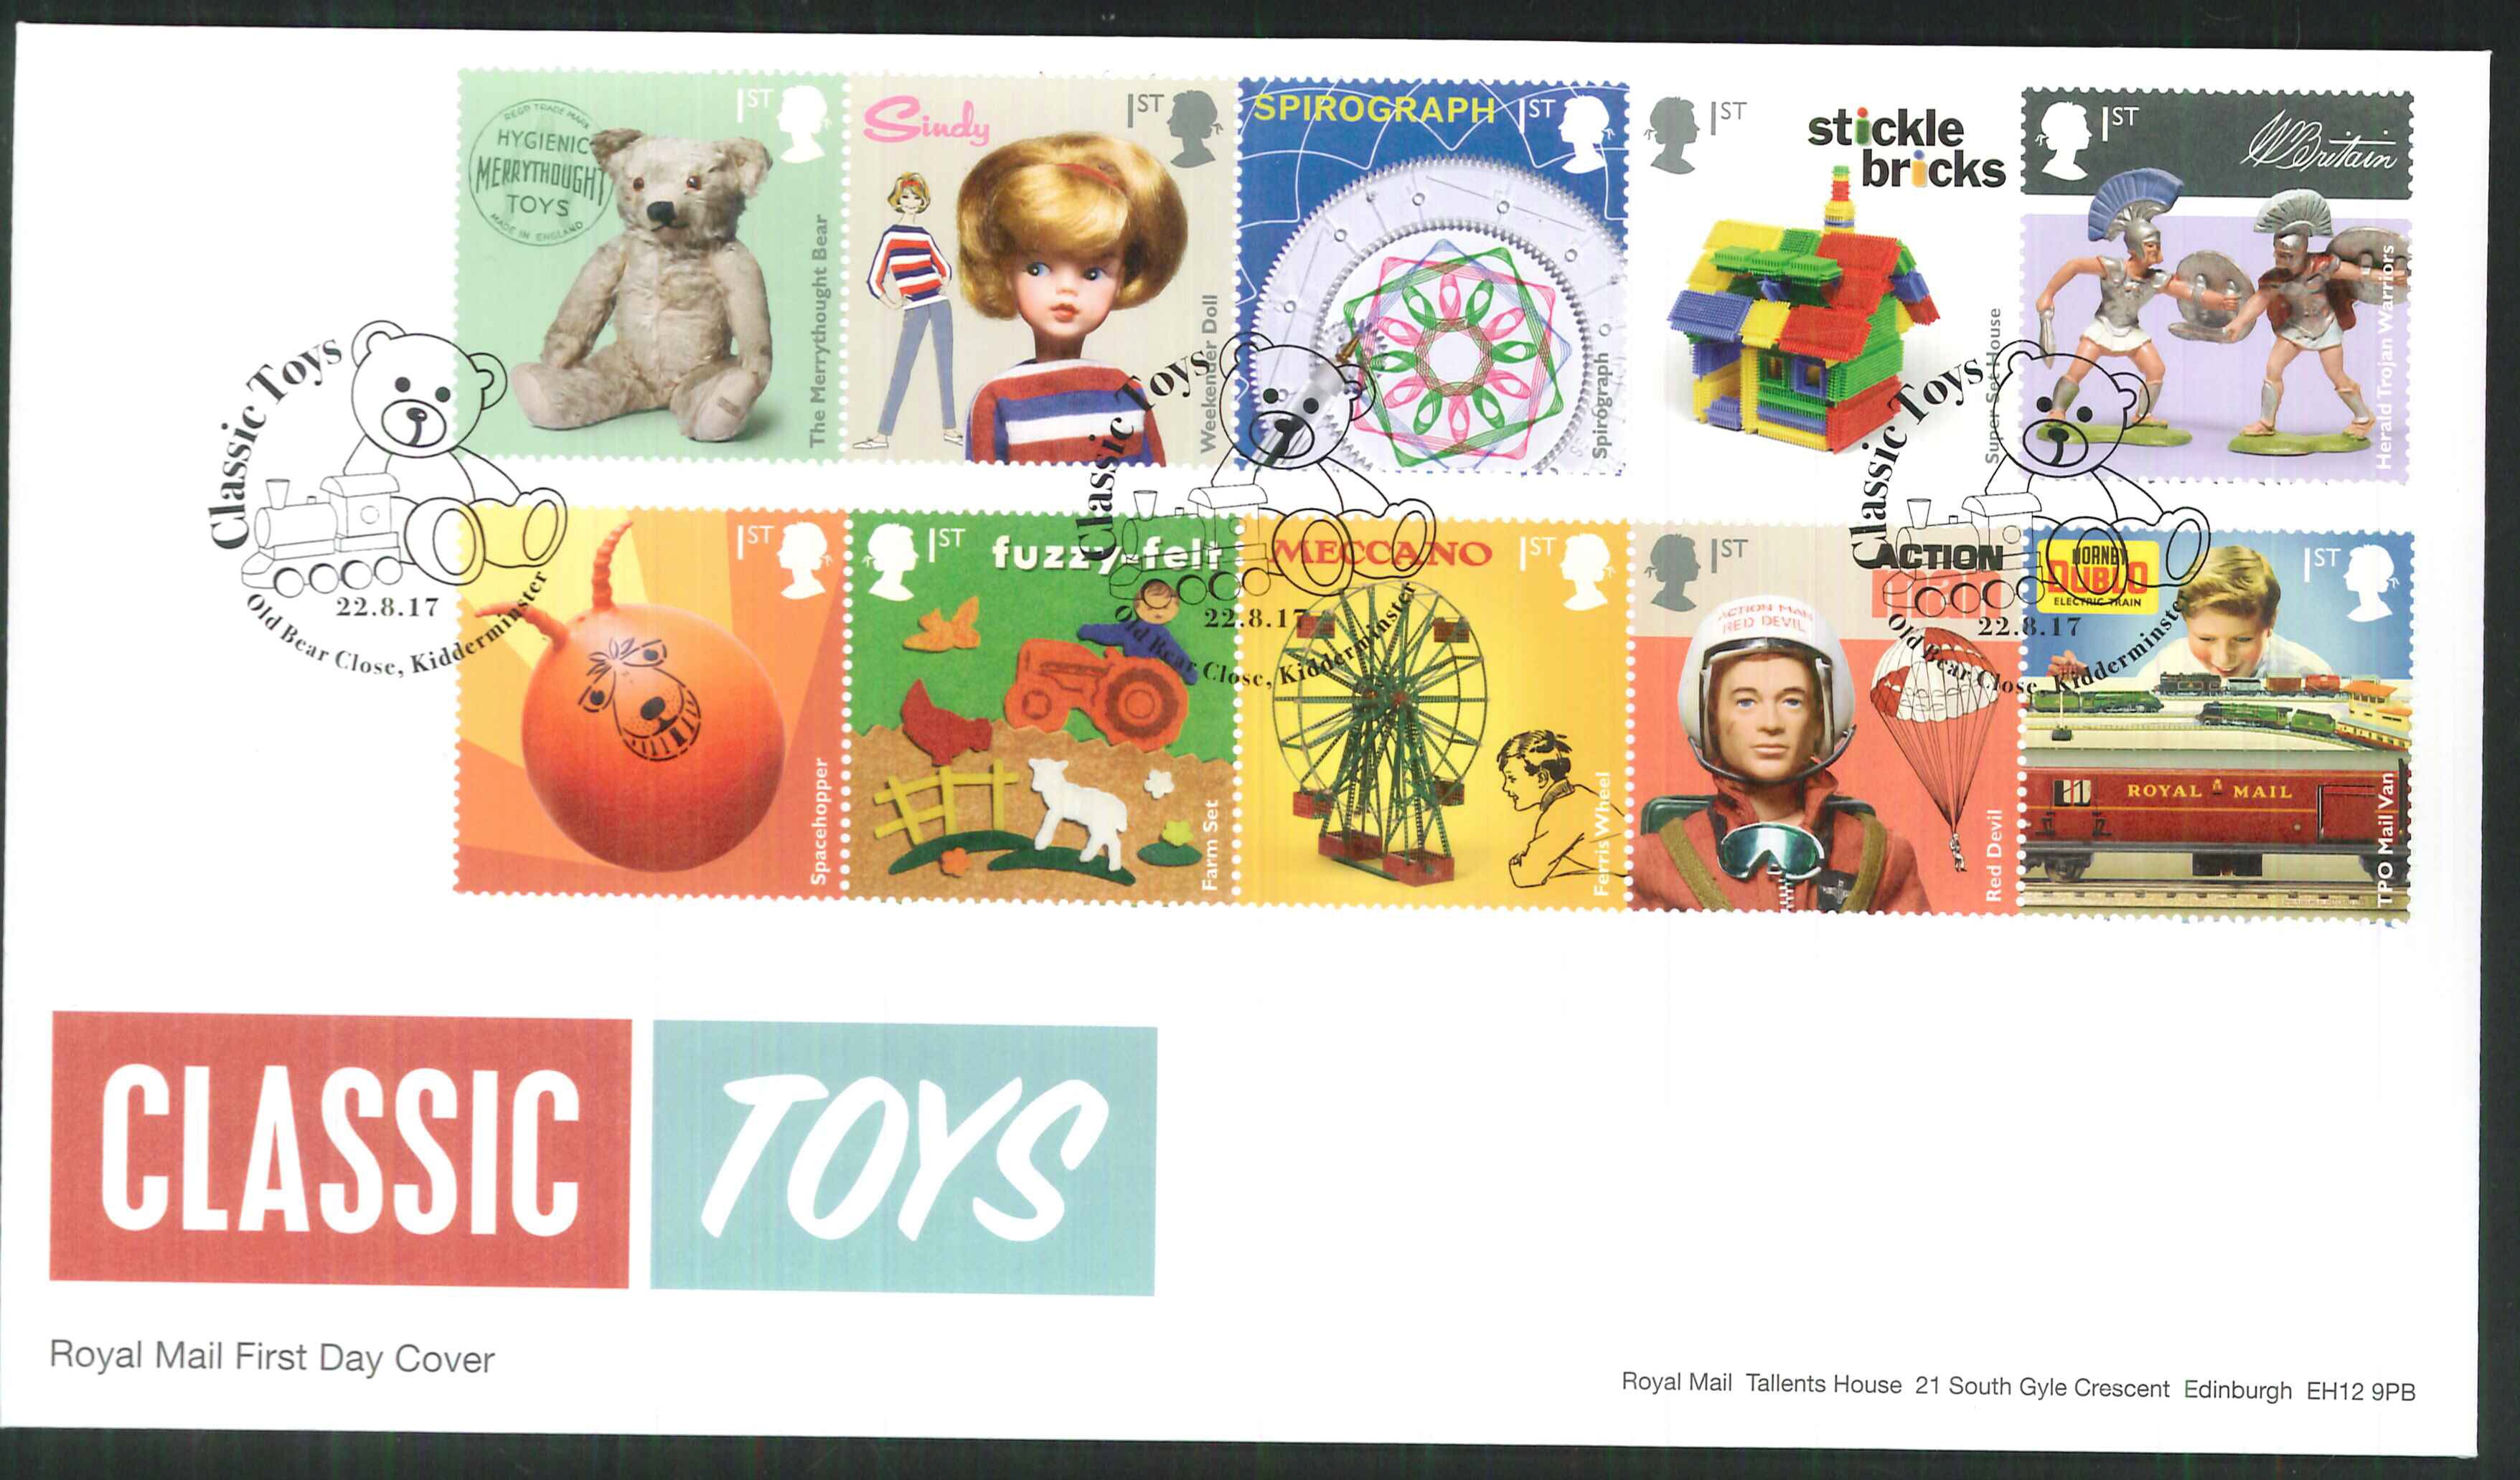 2017 - First Day Cover "Toys" - Old Bear Close Kidderminster Postmark